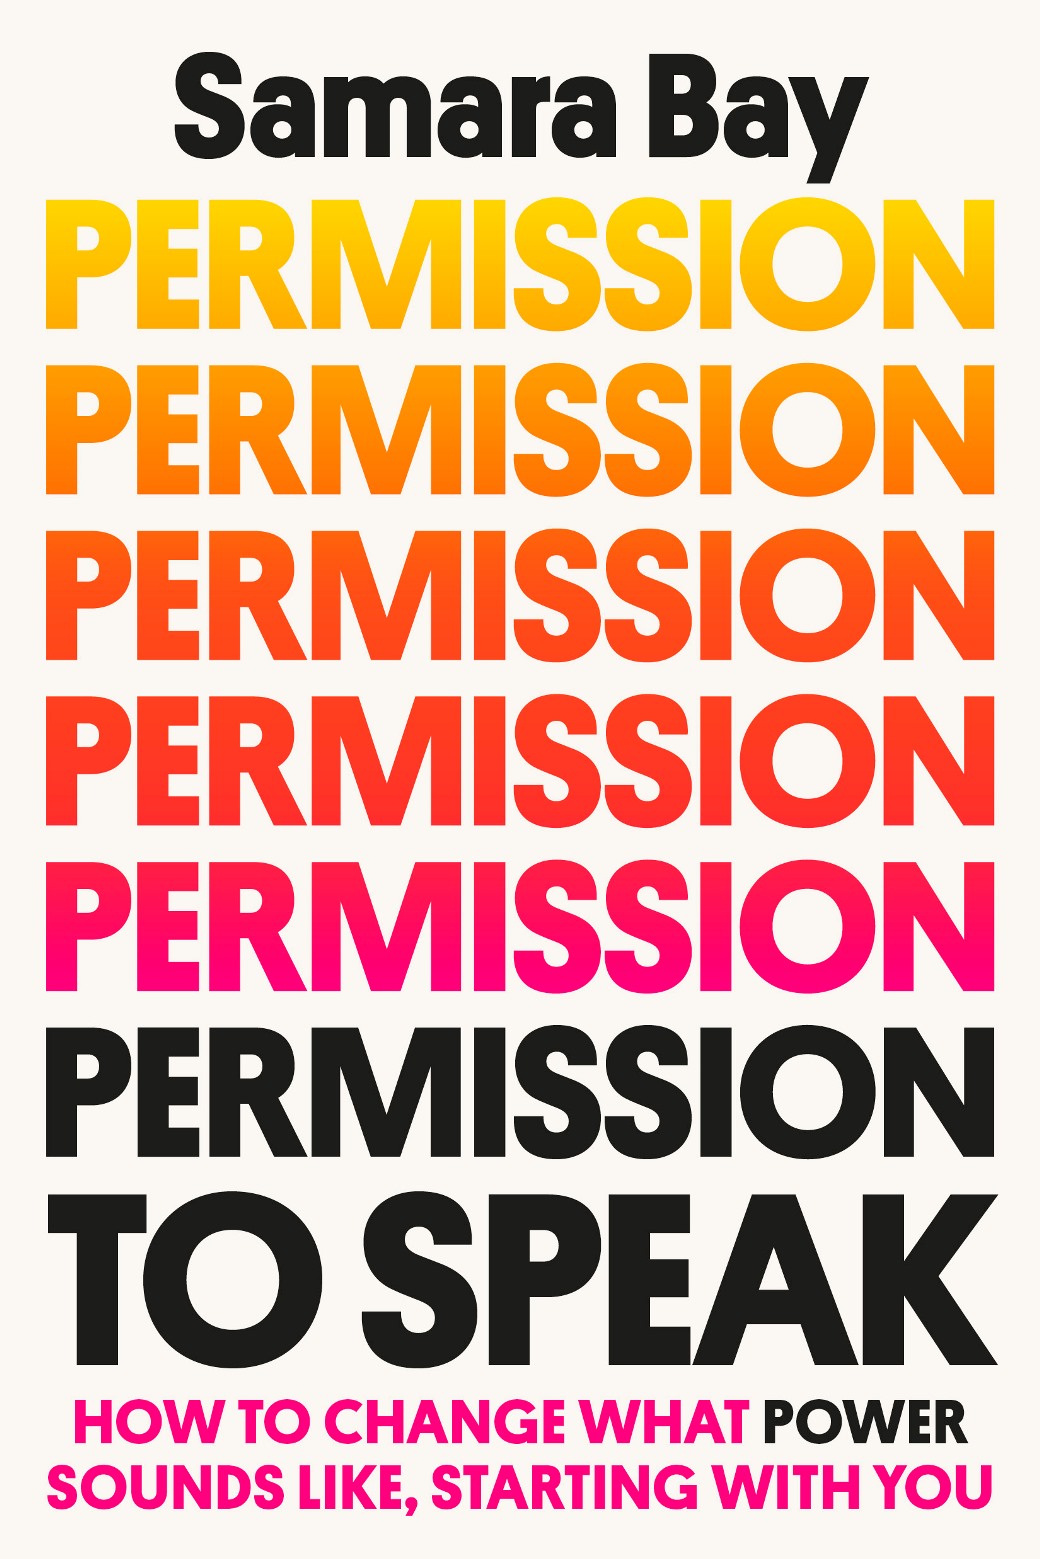 Permission to Speak: How to Change What Power Sounds Like, Starting with You, by Samara Bay